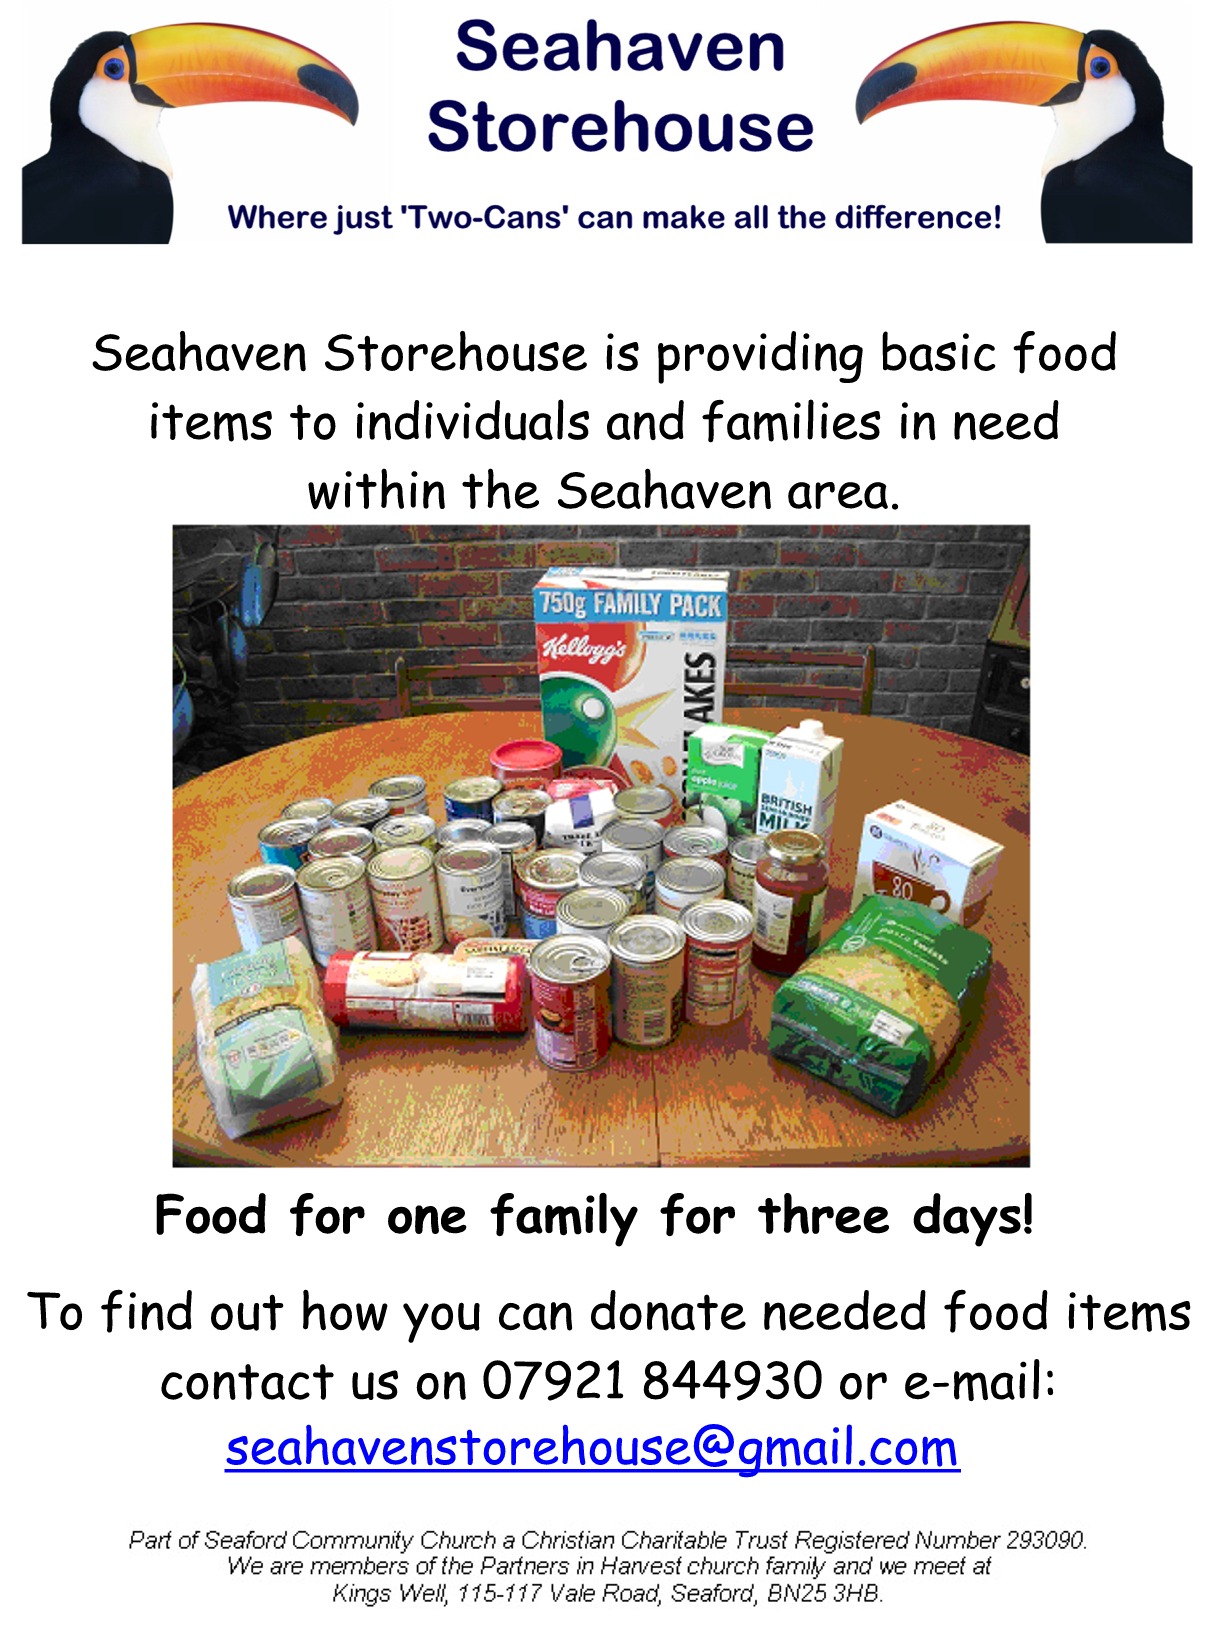 Seahaven Storehouse, operating in Seaford, Newhaven and Peacehaven, provides food items for individuals and families in need